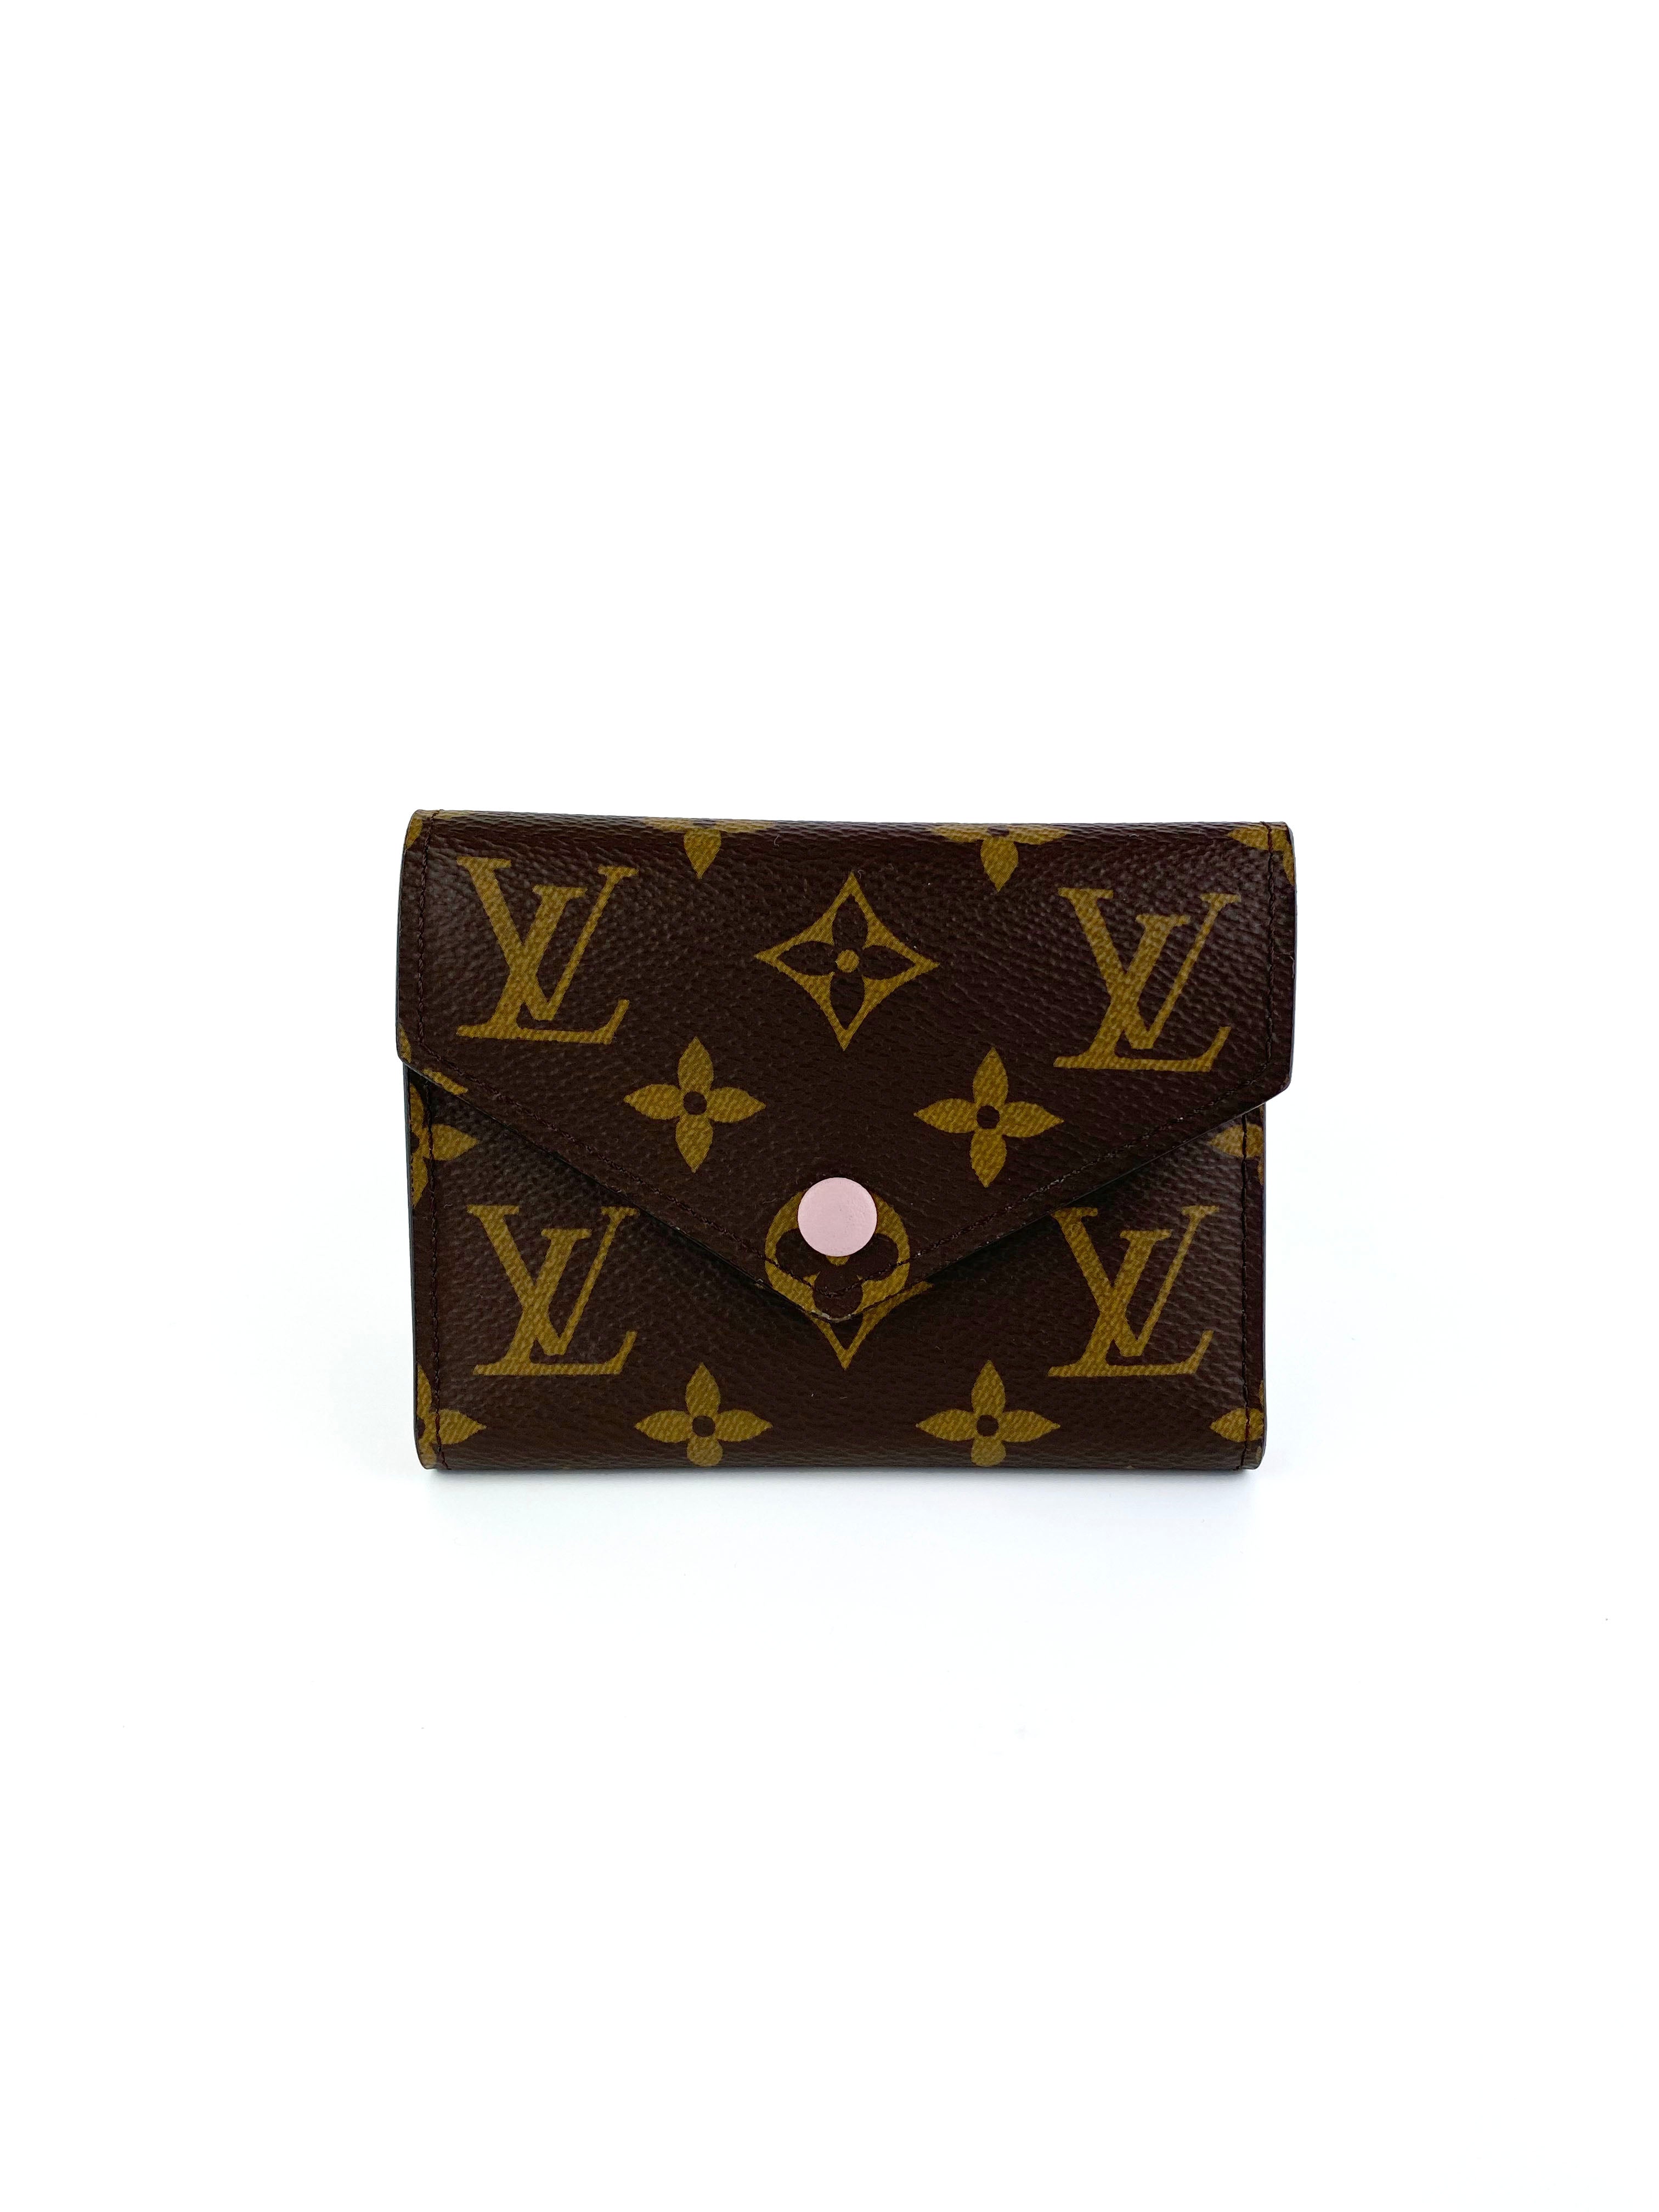 Louis Vuitton Wallets for sale in Nandaly, Victoria, Australia, Facebook  Marketplace